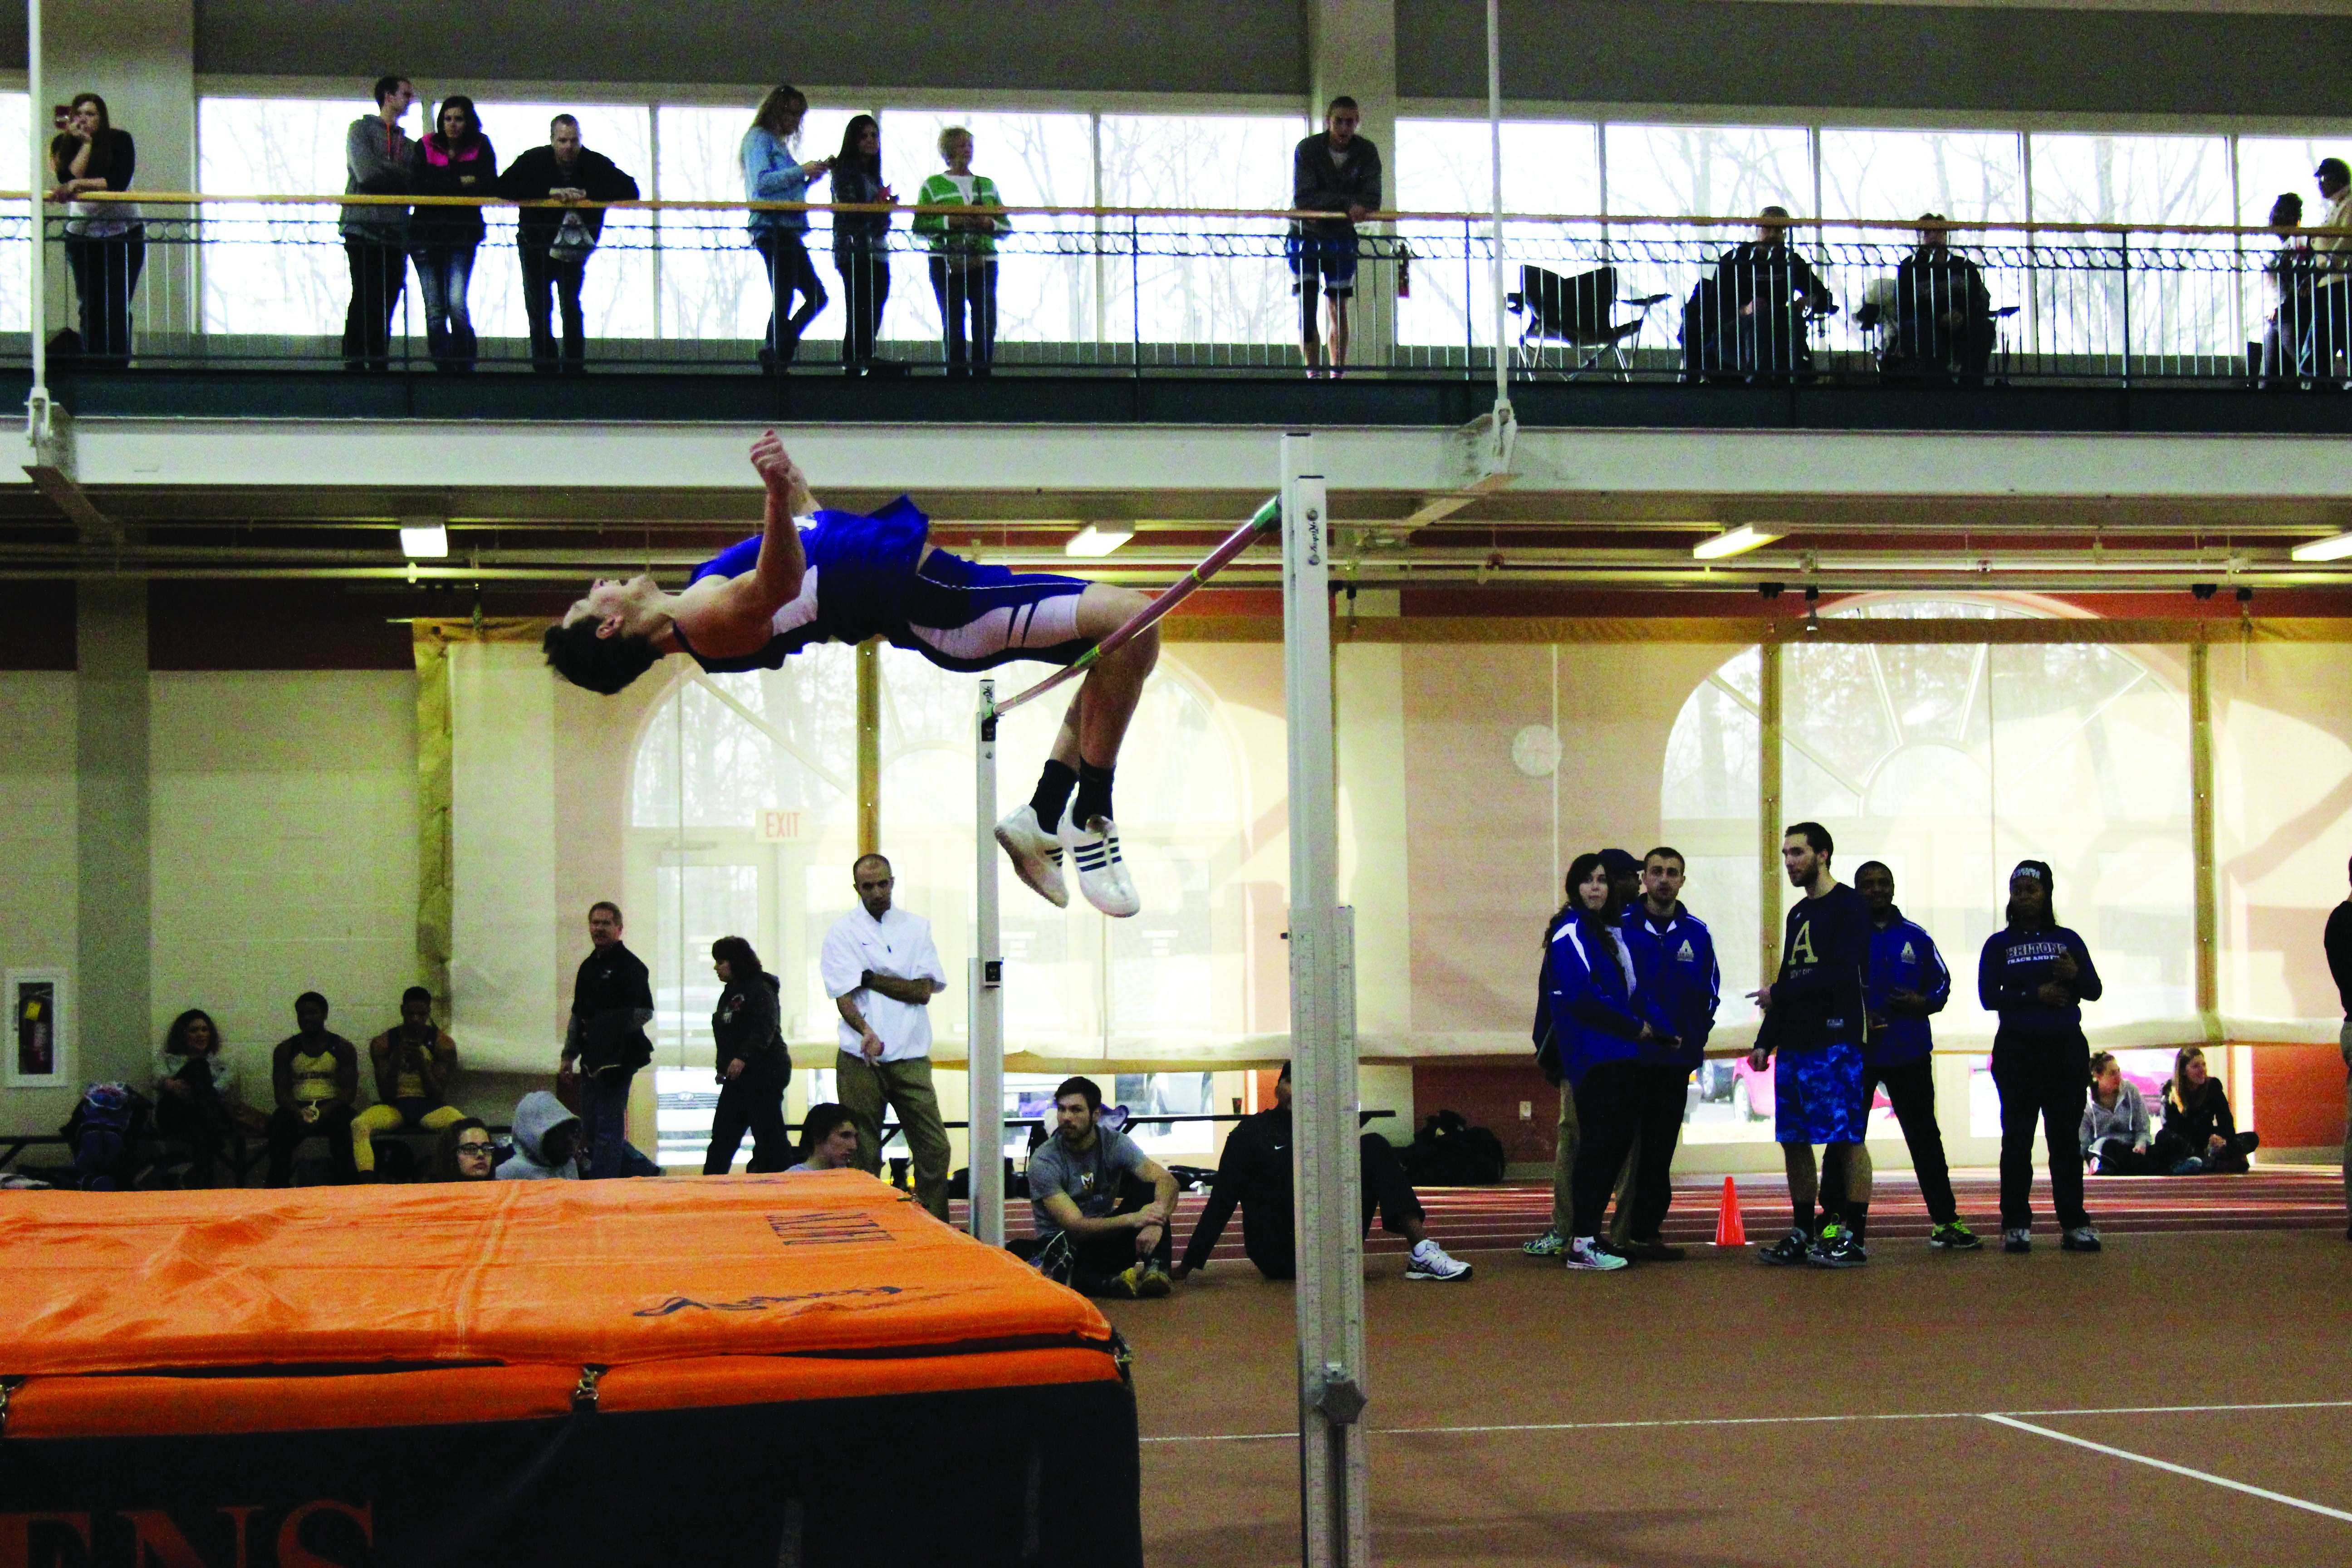 Image of Derek Swartzendruber mid-jump over the bar during the high jump event